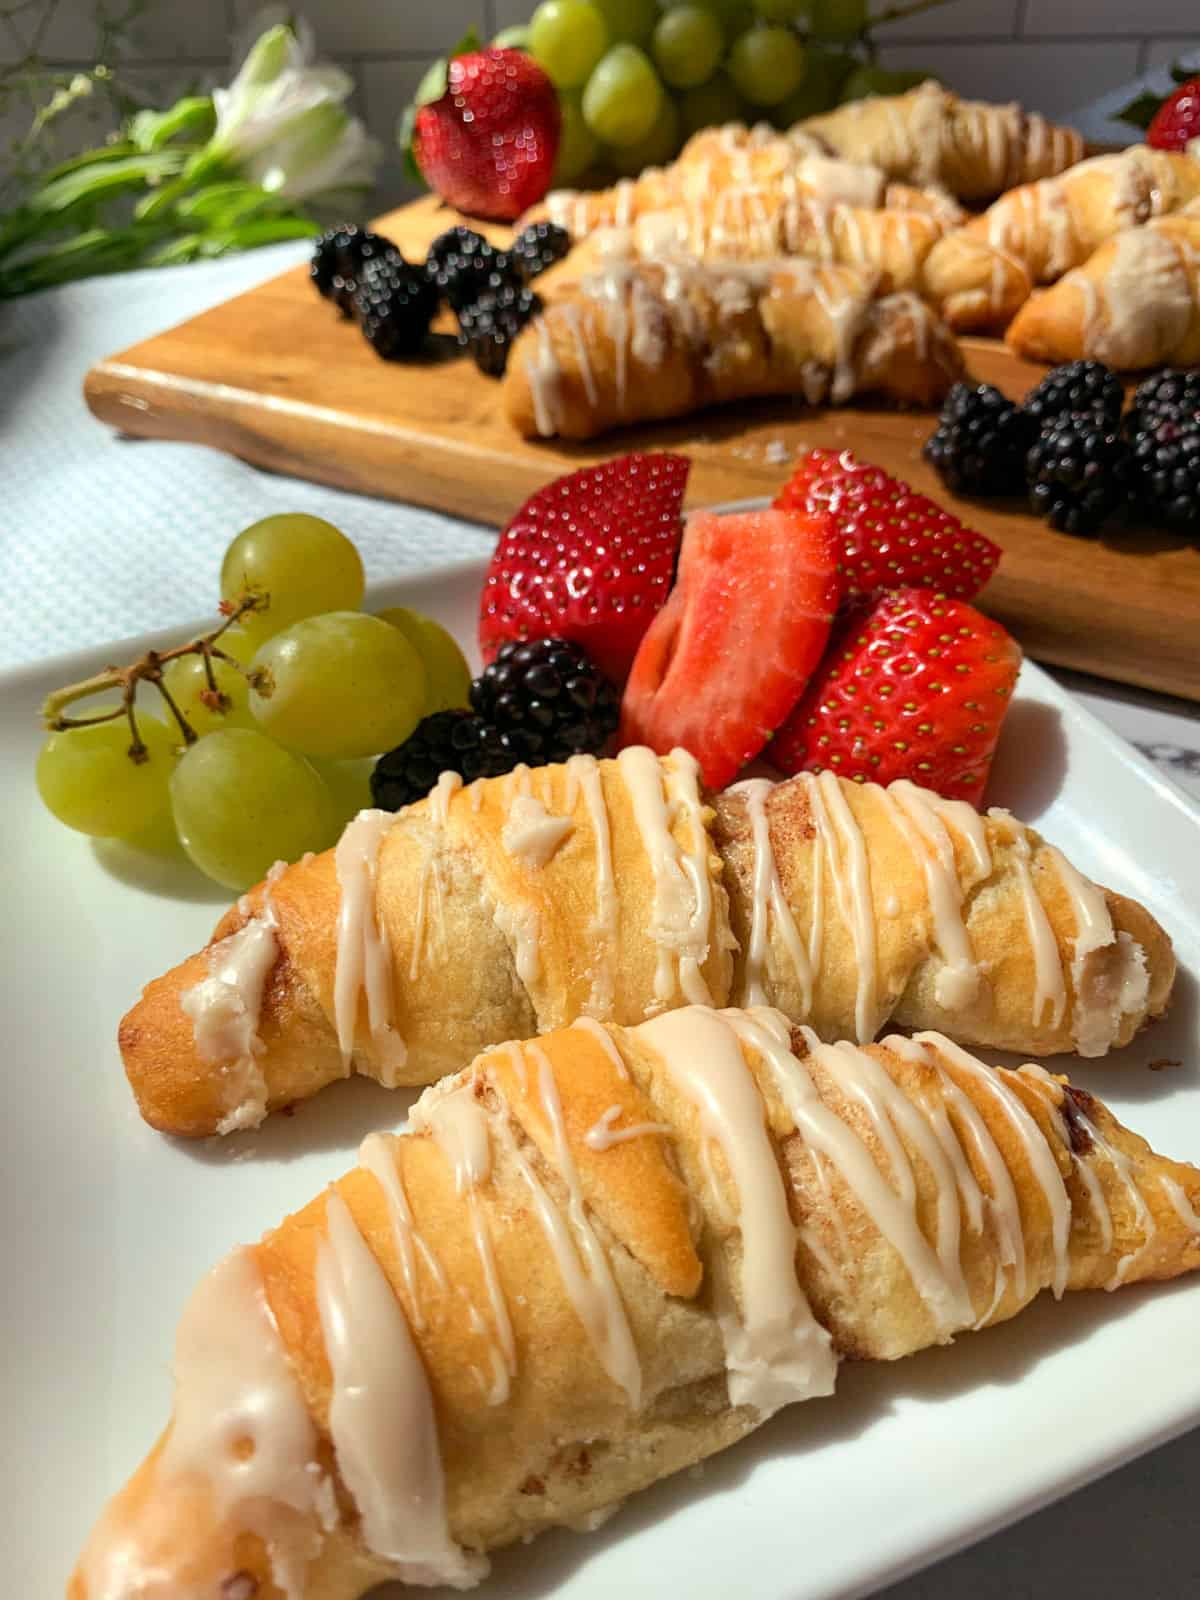 A white plate with crescent rolls on it along with strawberry, blackberries and grapes.